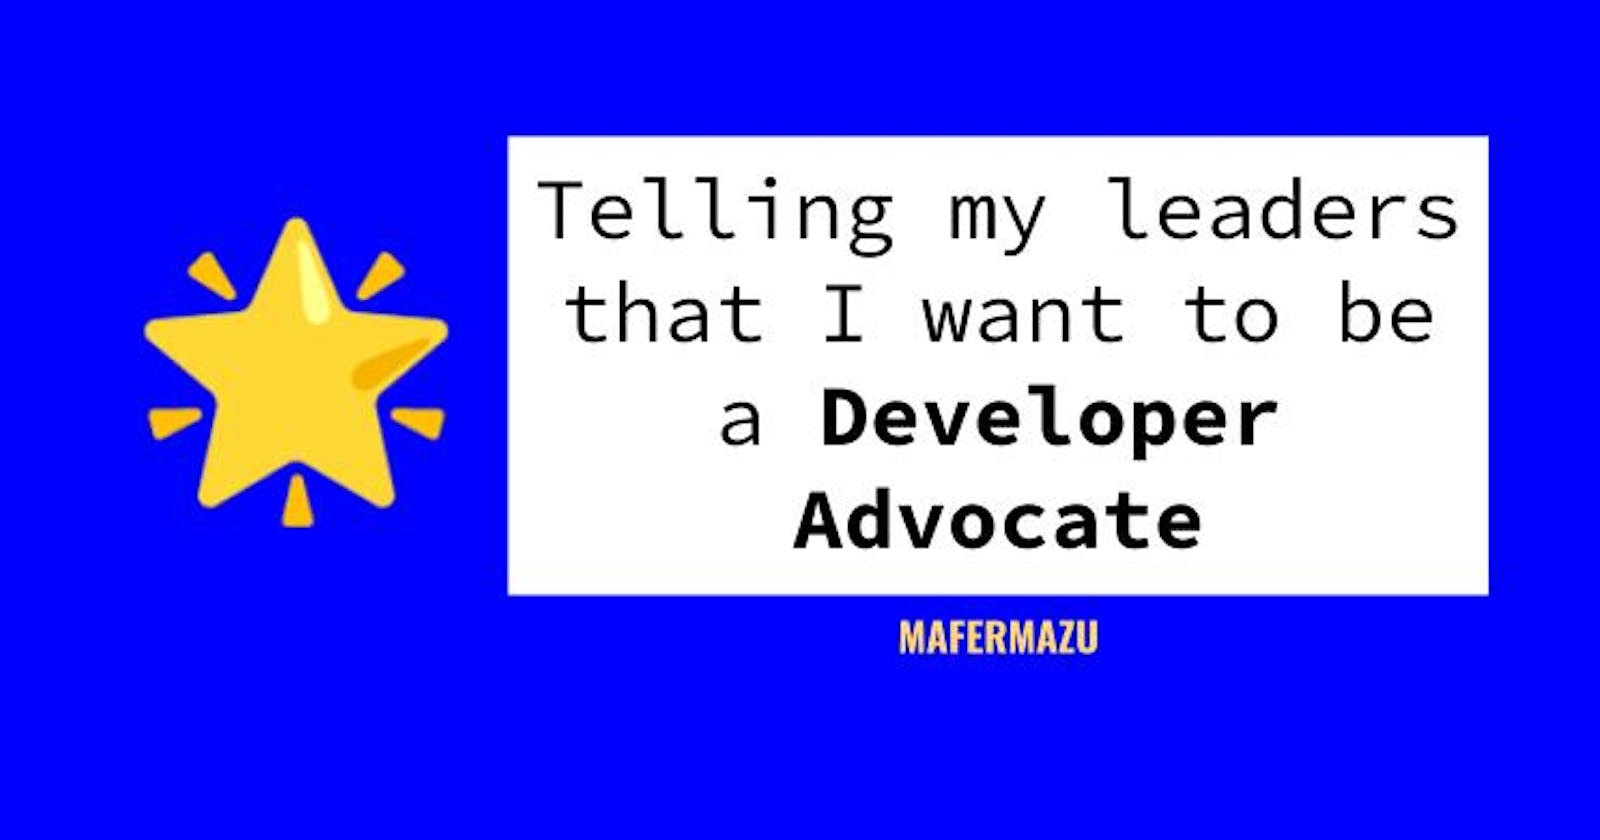 Telling my leaders that I want to be a dev advocate and the challenge of creating my own role - #DAJ 6